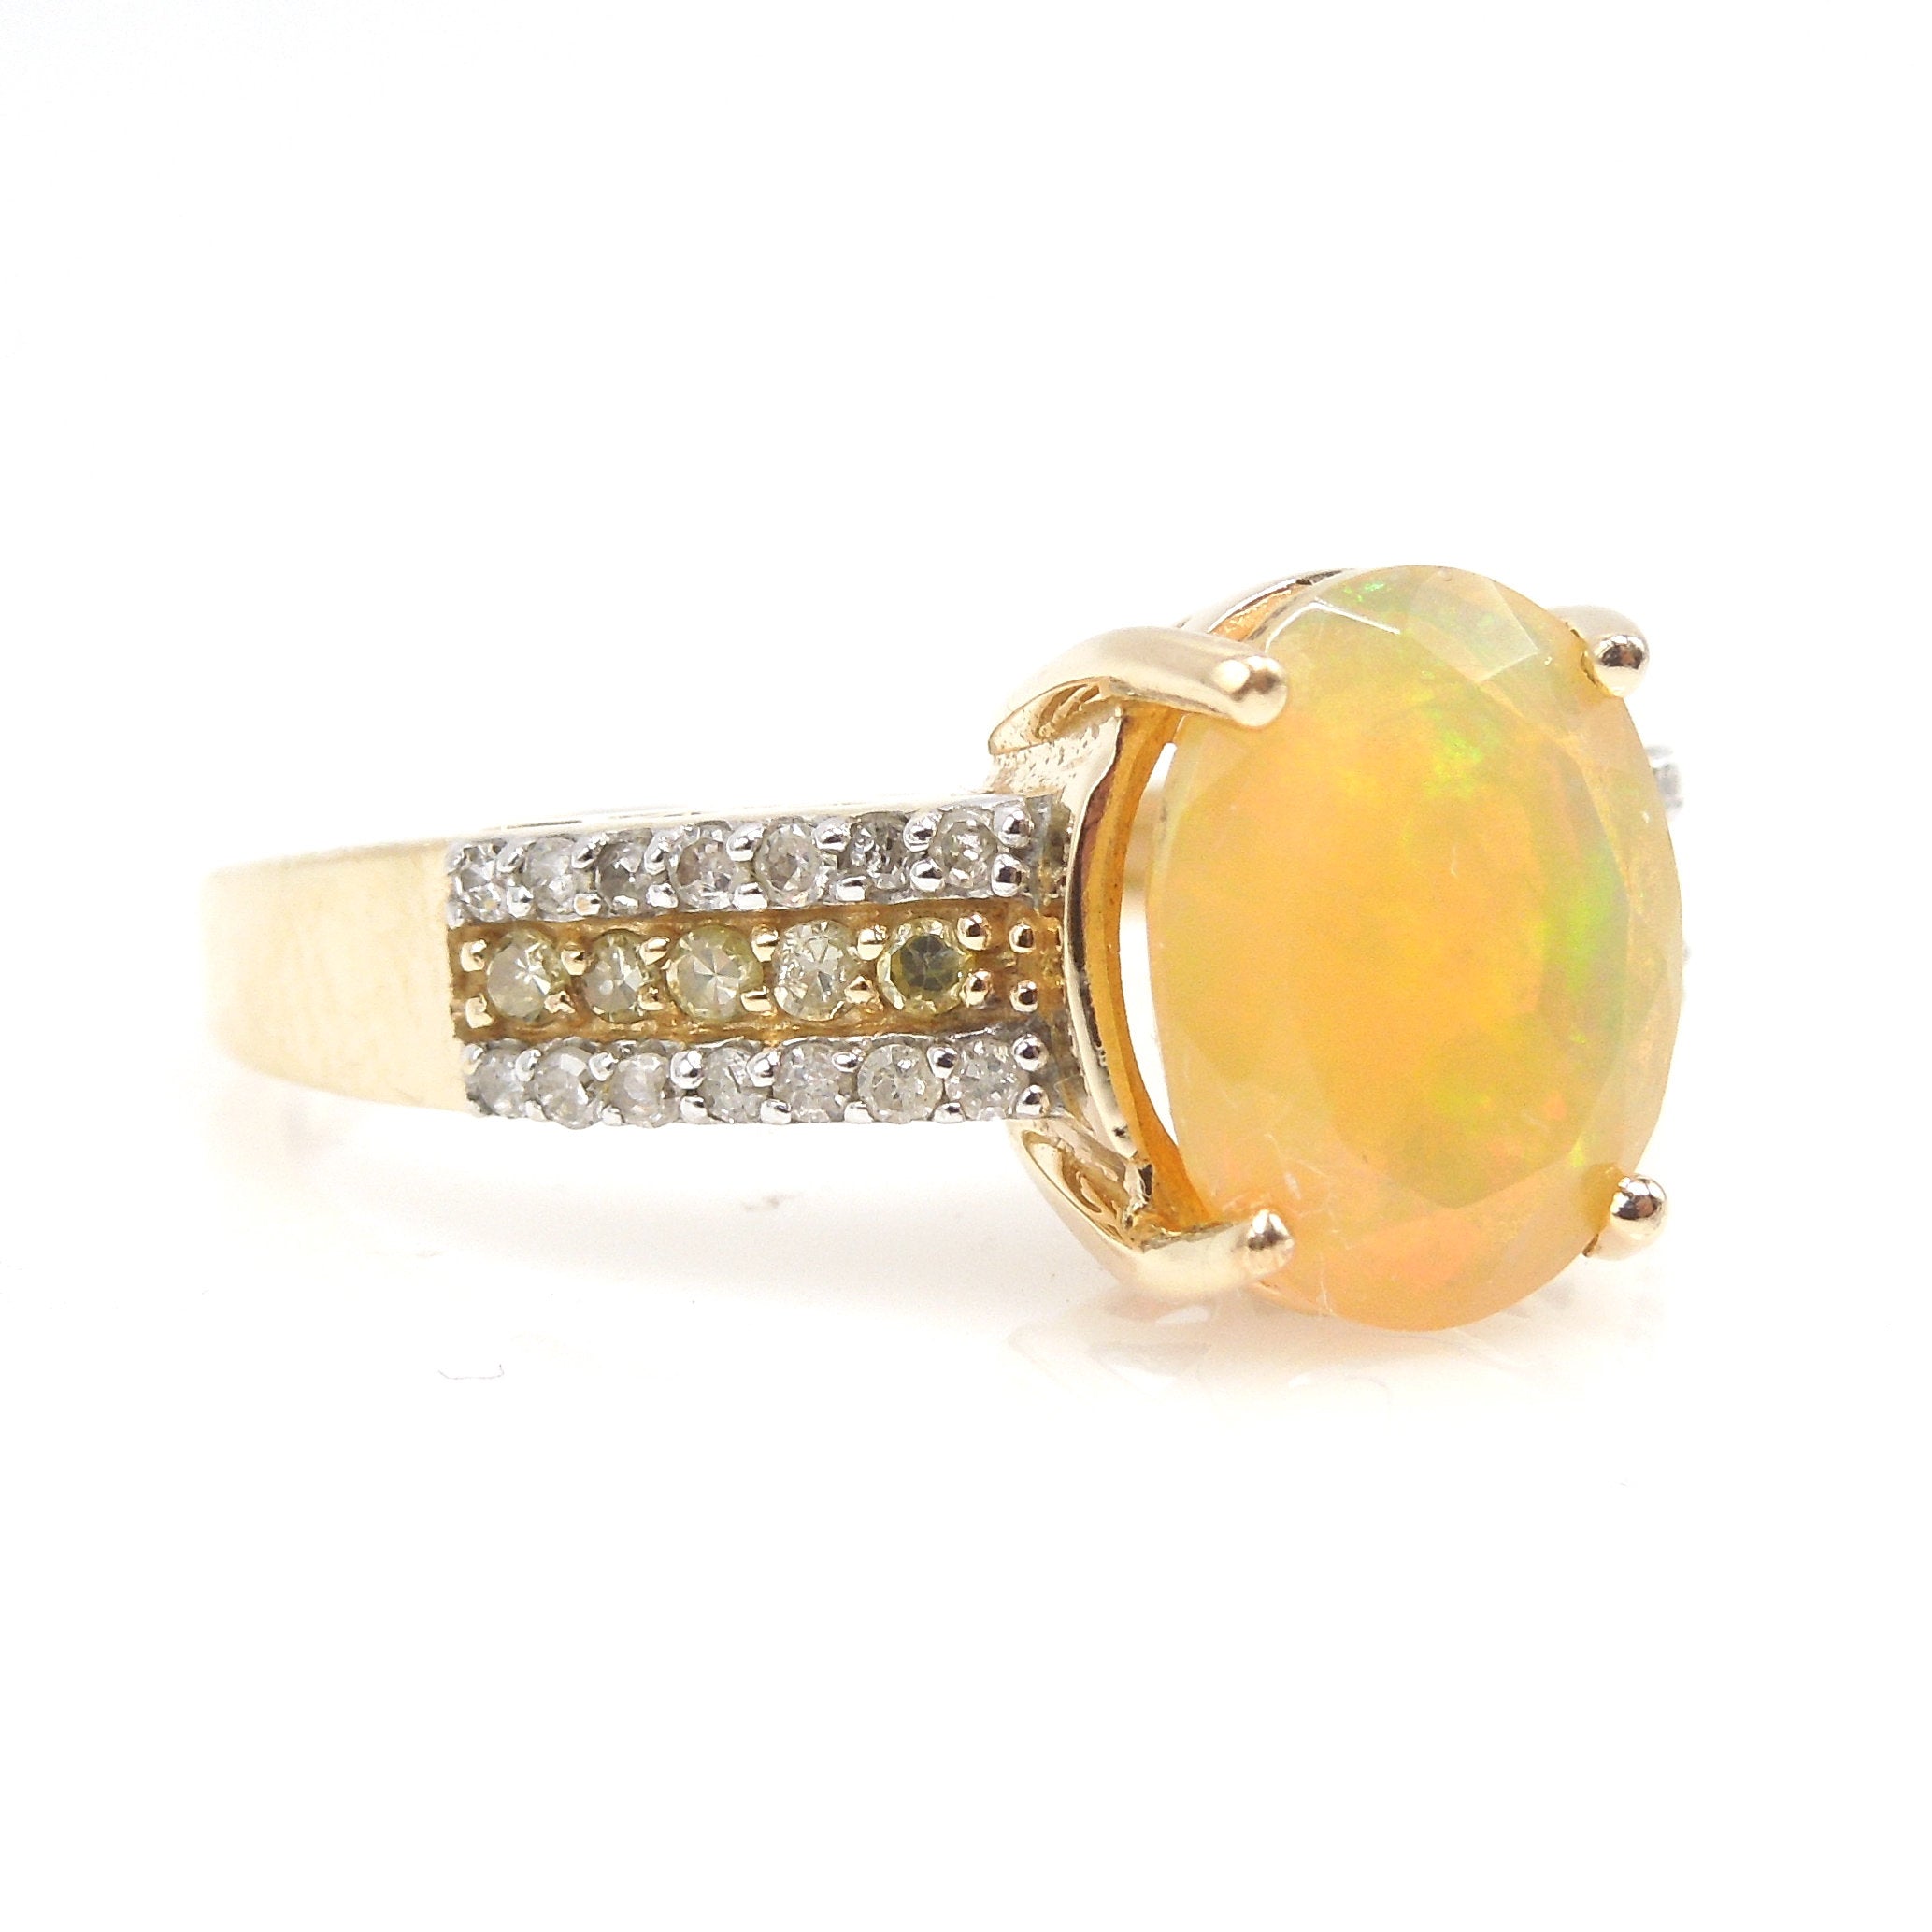 Faceted Fiery Gray Crystal Opal Ring with White Diamonds and Yellow Diamonds in Yellow Gold